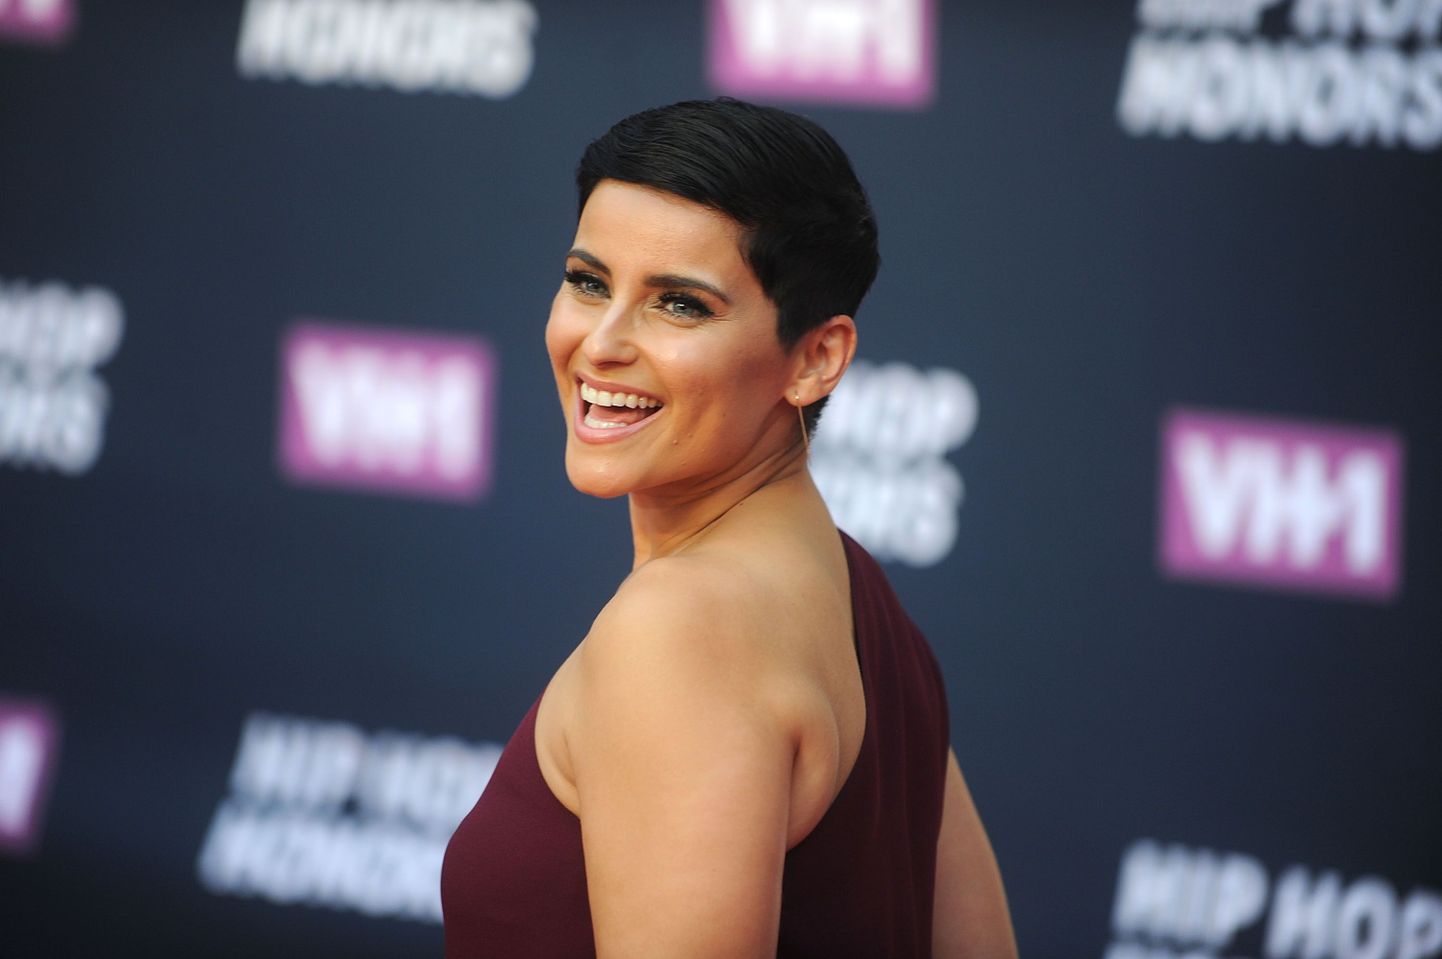 Nelly Furtado attends the arrivals at VH1's Hip Hop Honors at David Geffen Hall at Lincoln Center on Monday, July 11, 2016, in New York. (Photo by Brad Barket/Invision/AP)